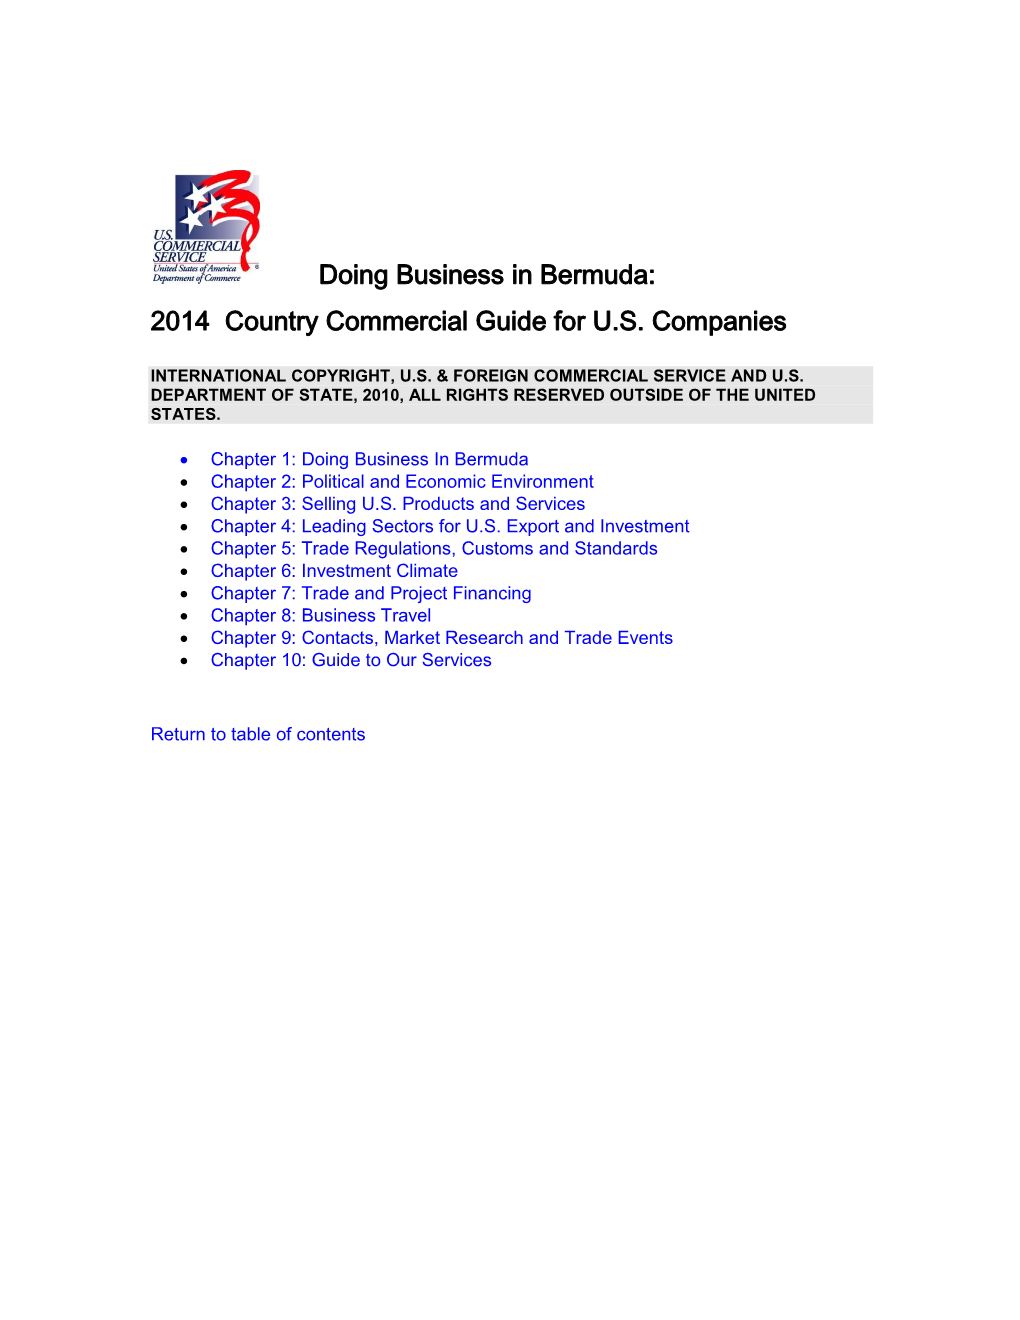 Doing Business in Bermuda: 2014 Country Commercial Guide for U.S